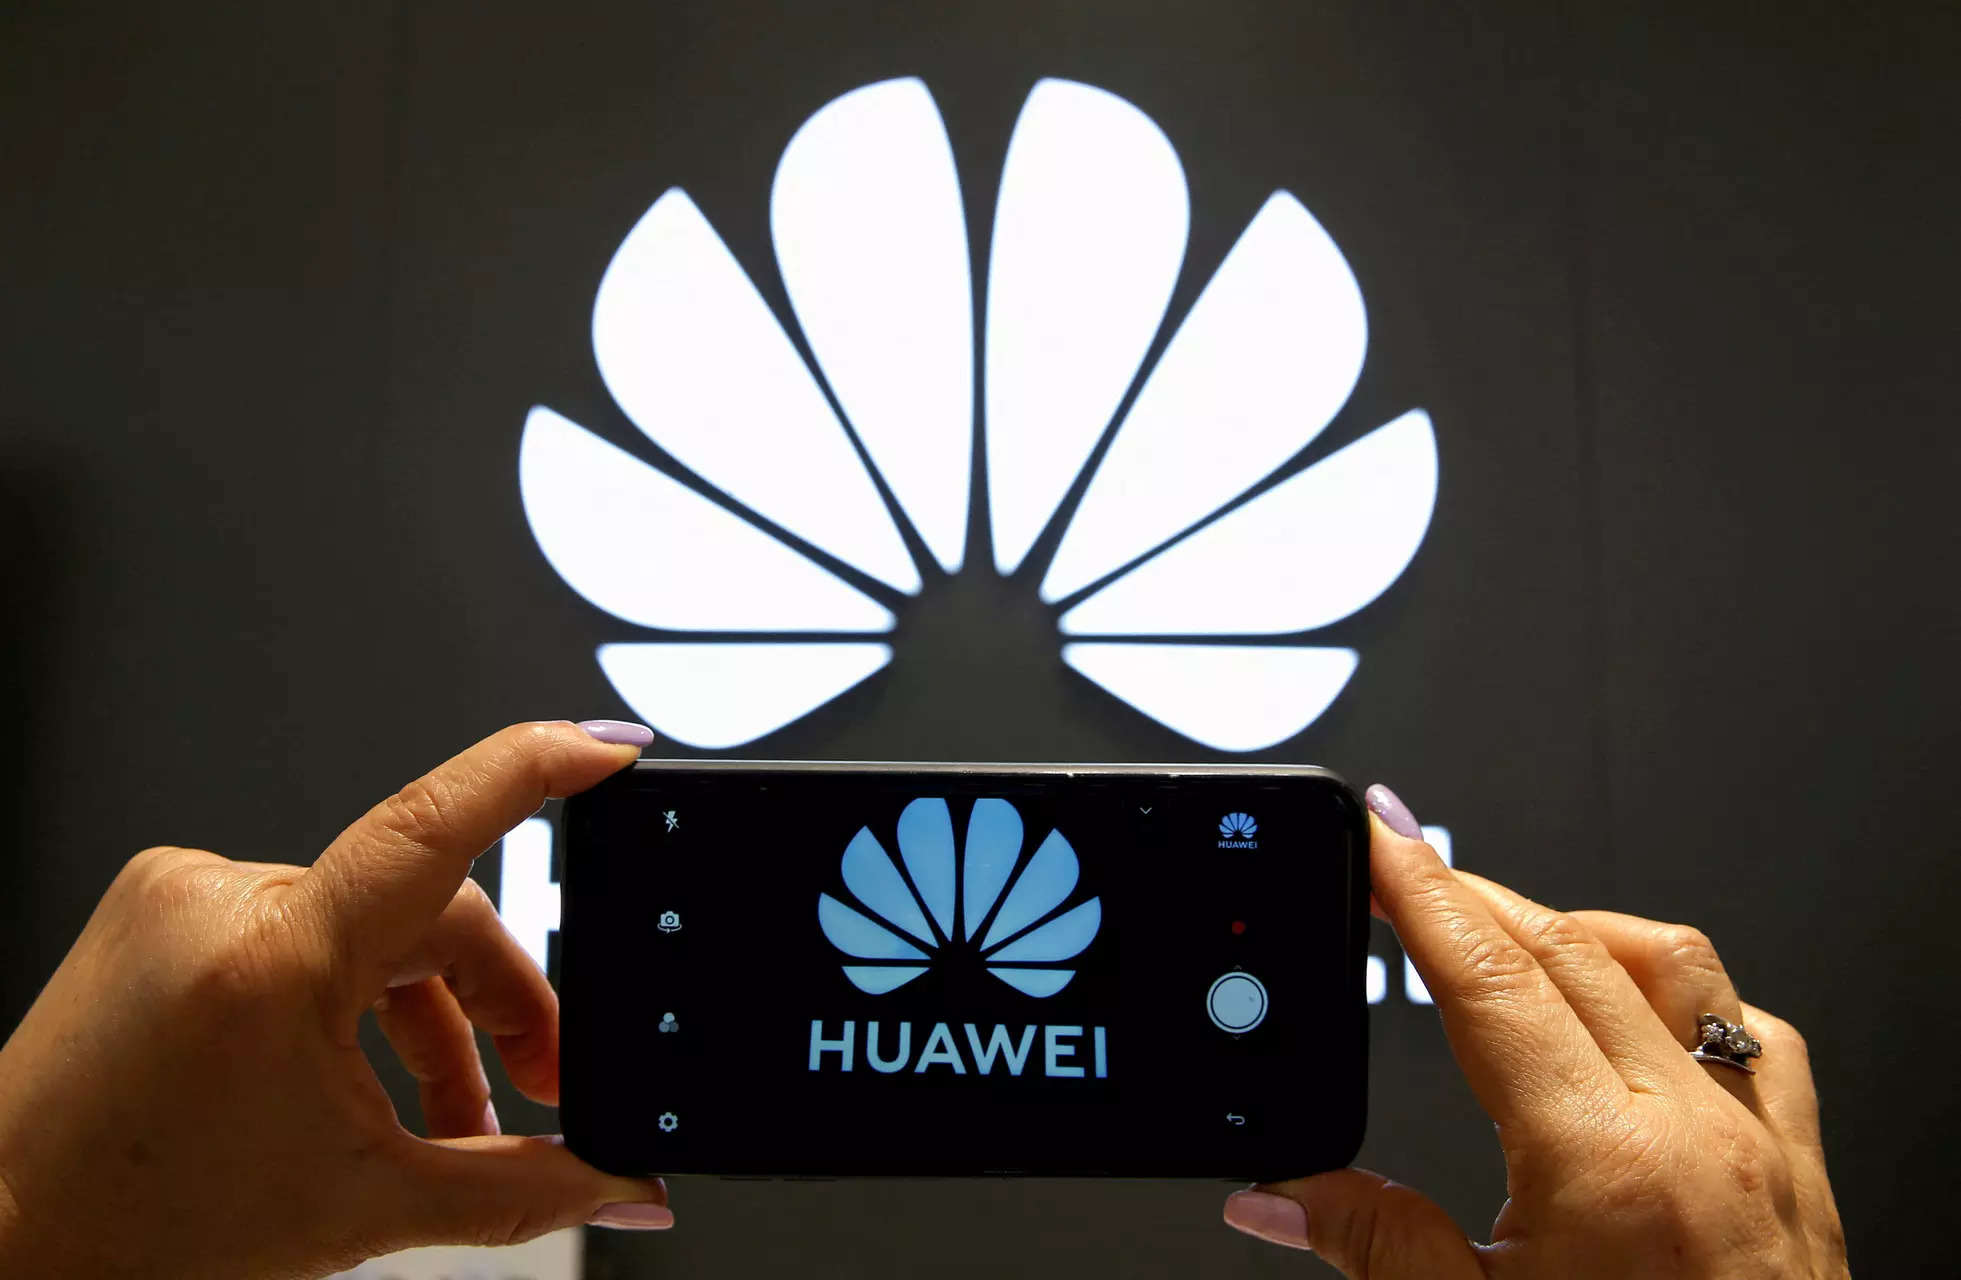 Chinese components double to 60% in new Huawei smartphone - Nikkei Asia